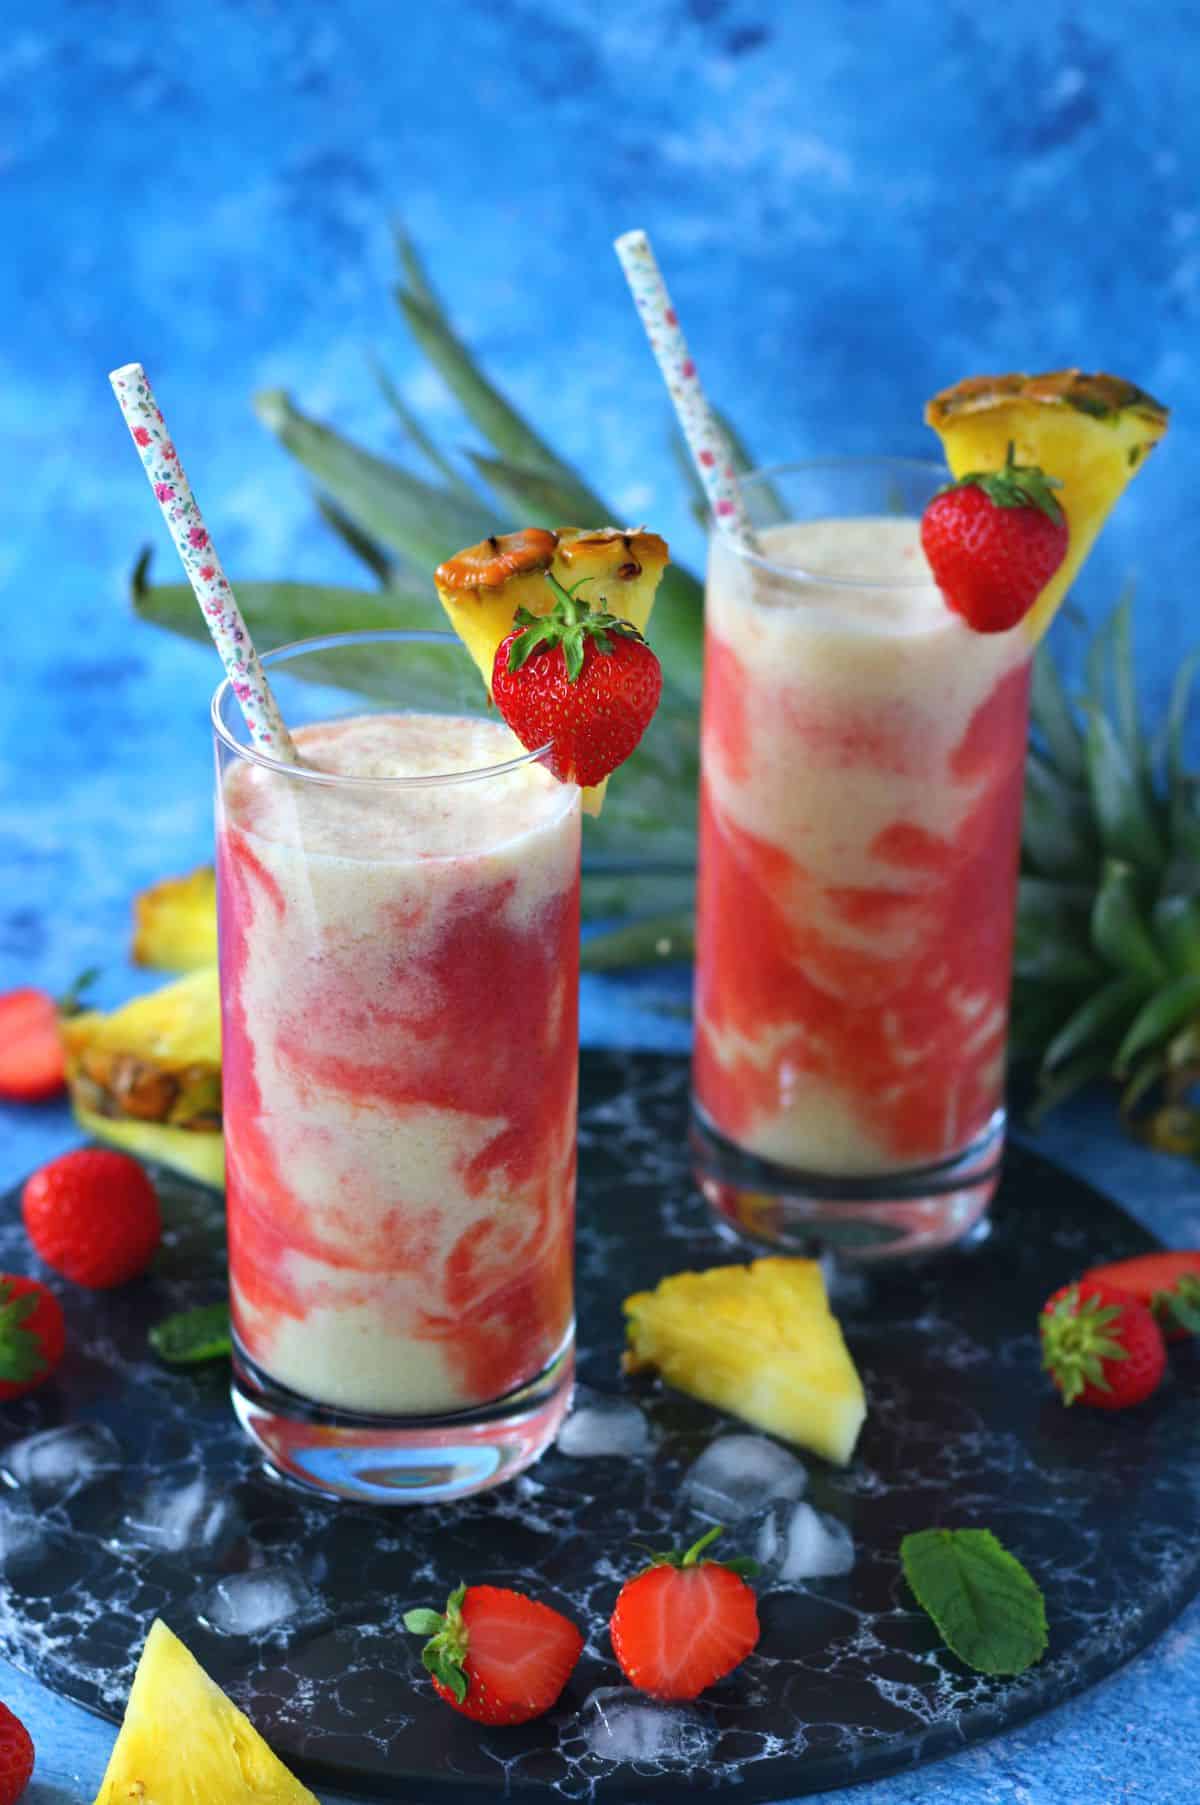 Two tall glasses of strawberry Pina Colada with straw and garnished with strawberry and pineapple wedge